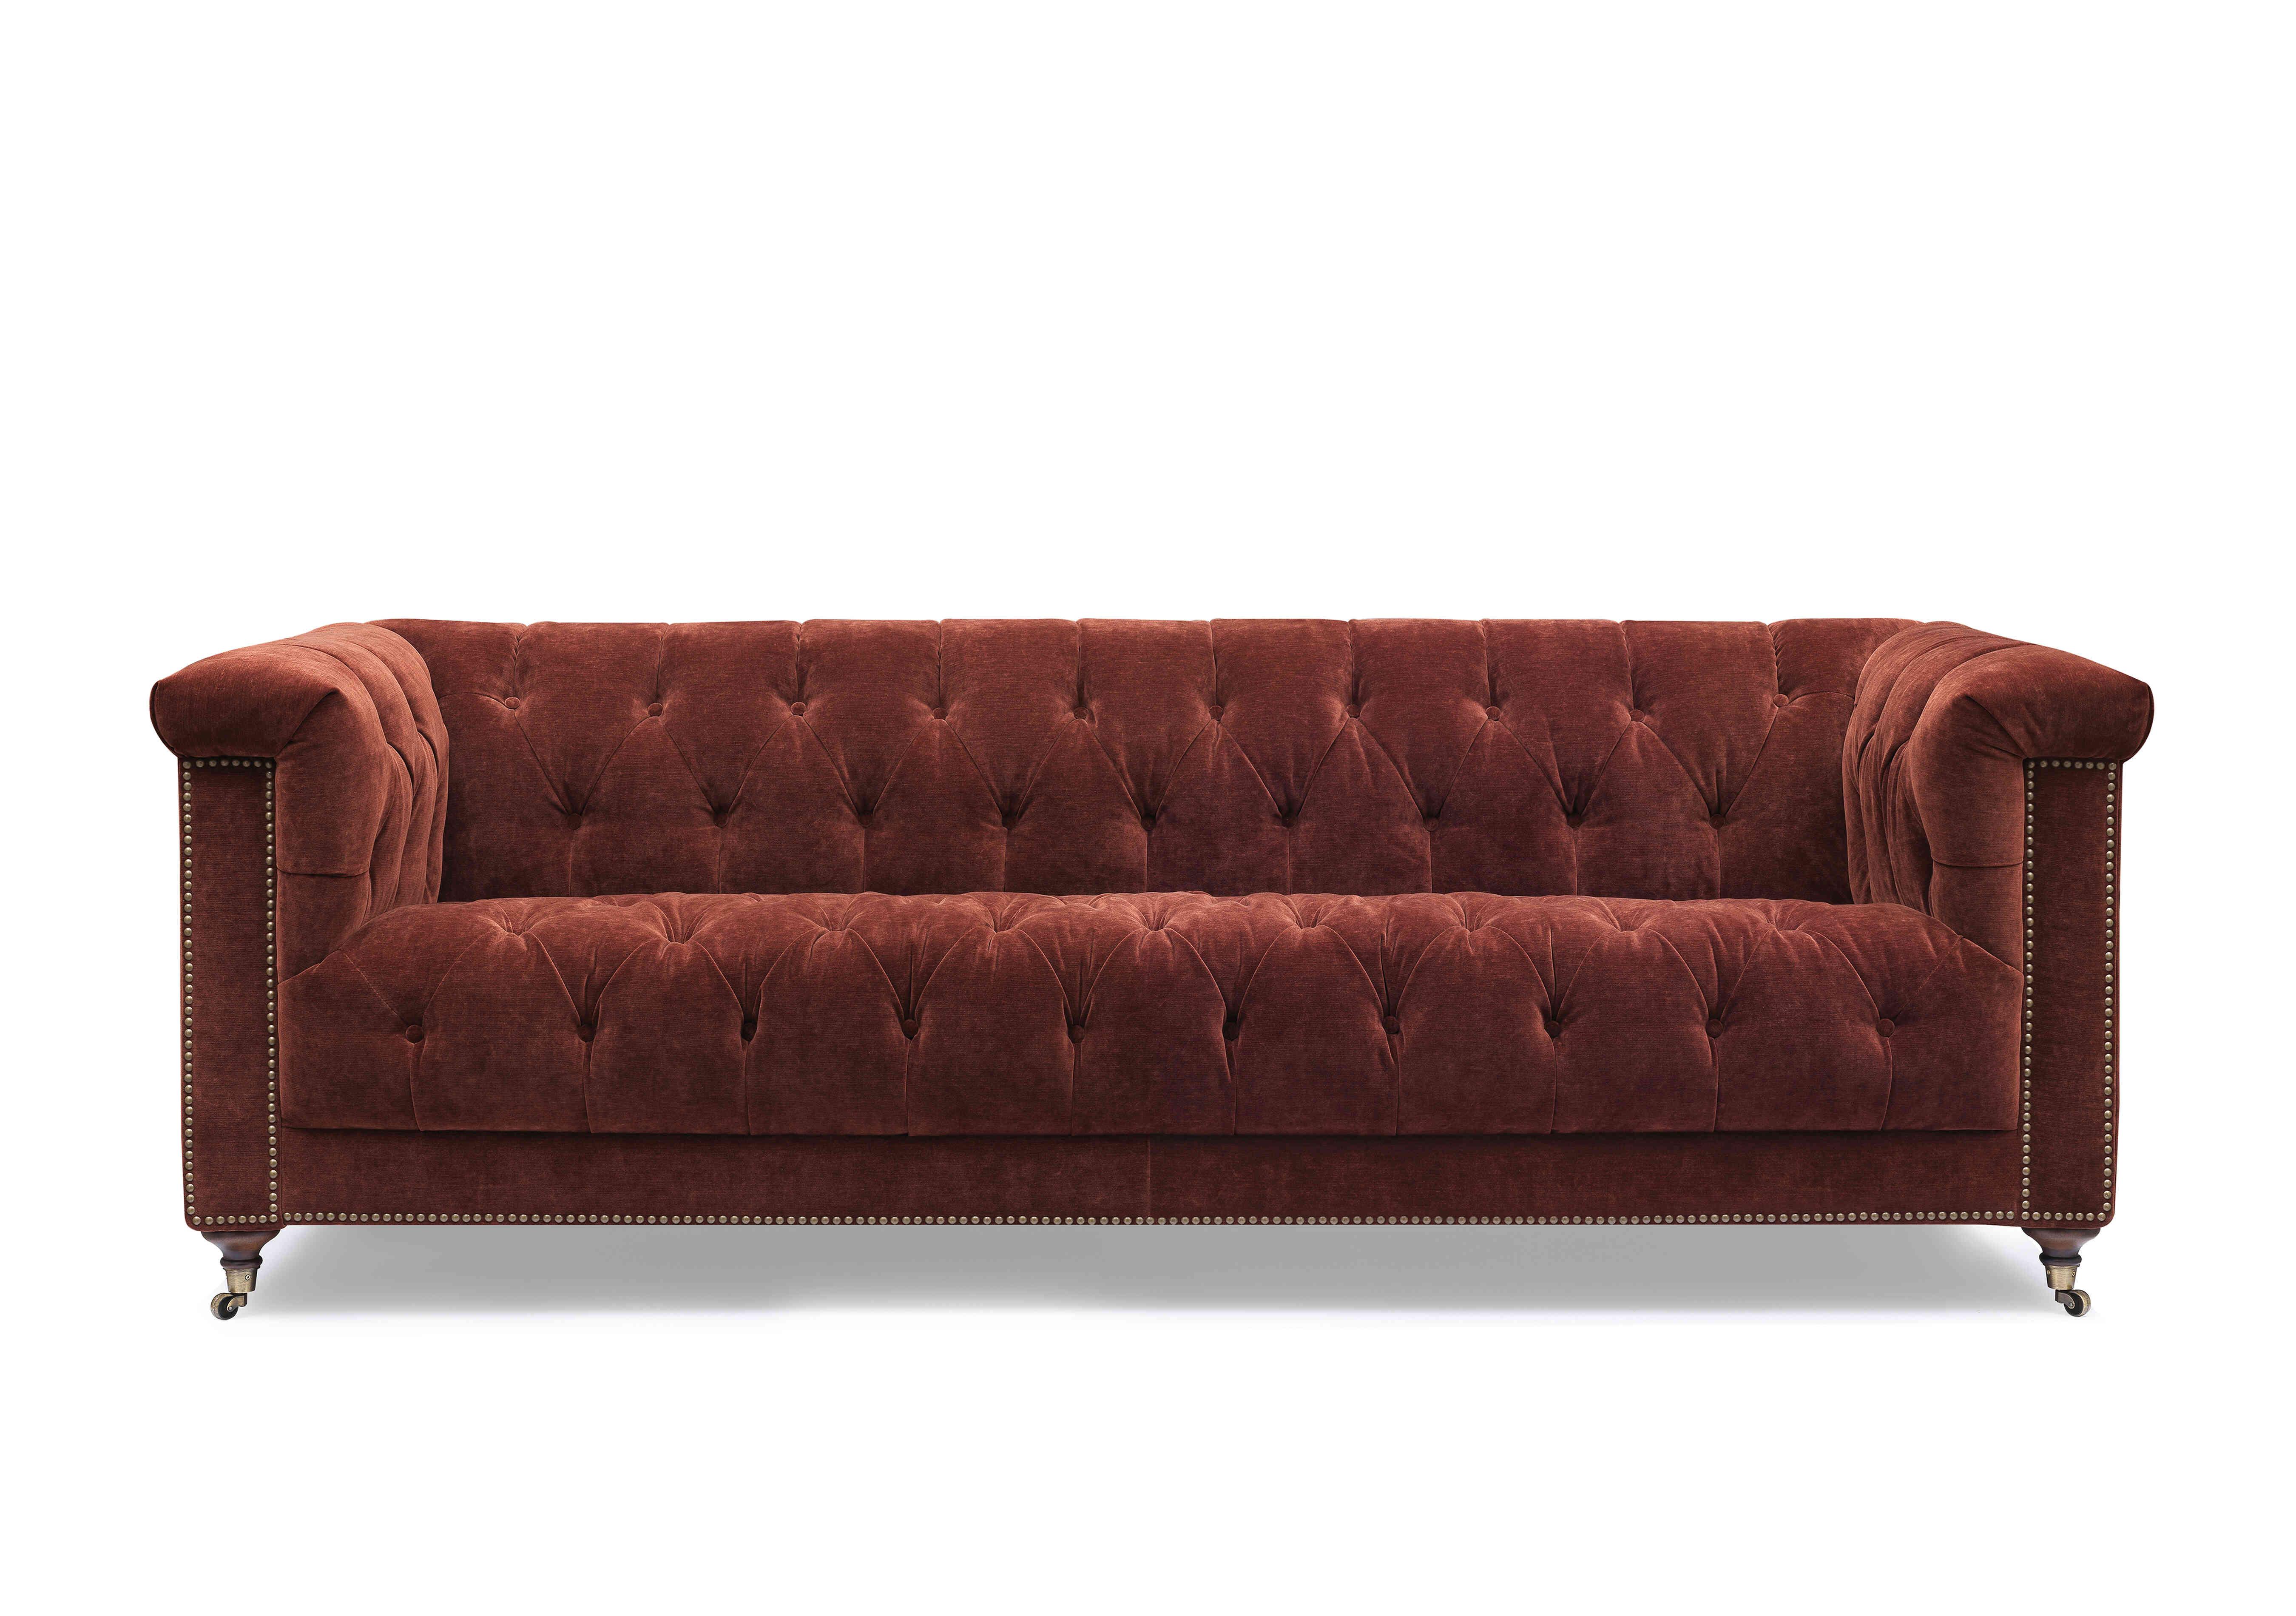 Wallace 4 Seater Fabric Chesterfield Sofa in X3y1-W019 Tawny on Furniture Village